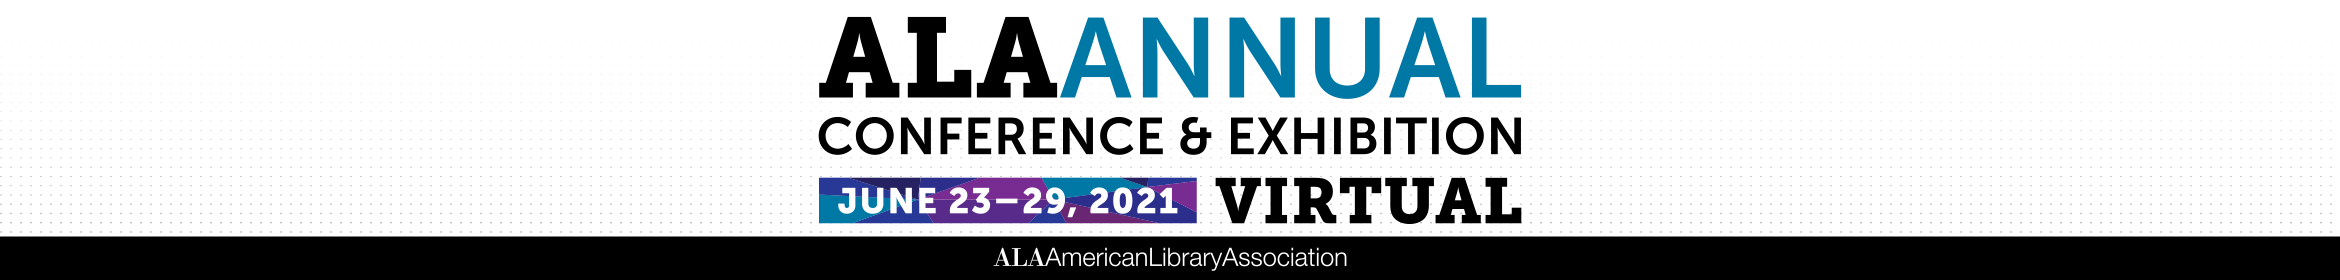 2021 Annual Conference Virtual Main banner